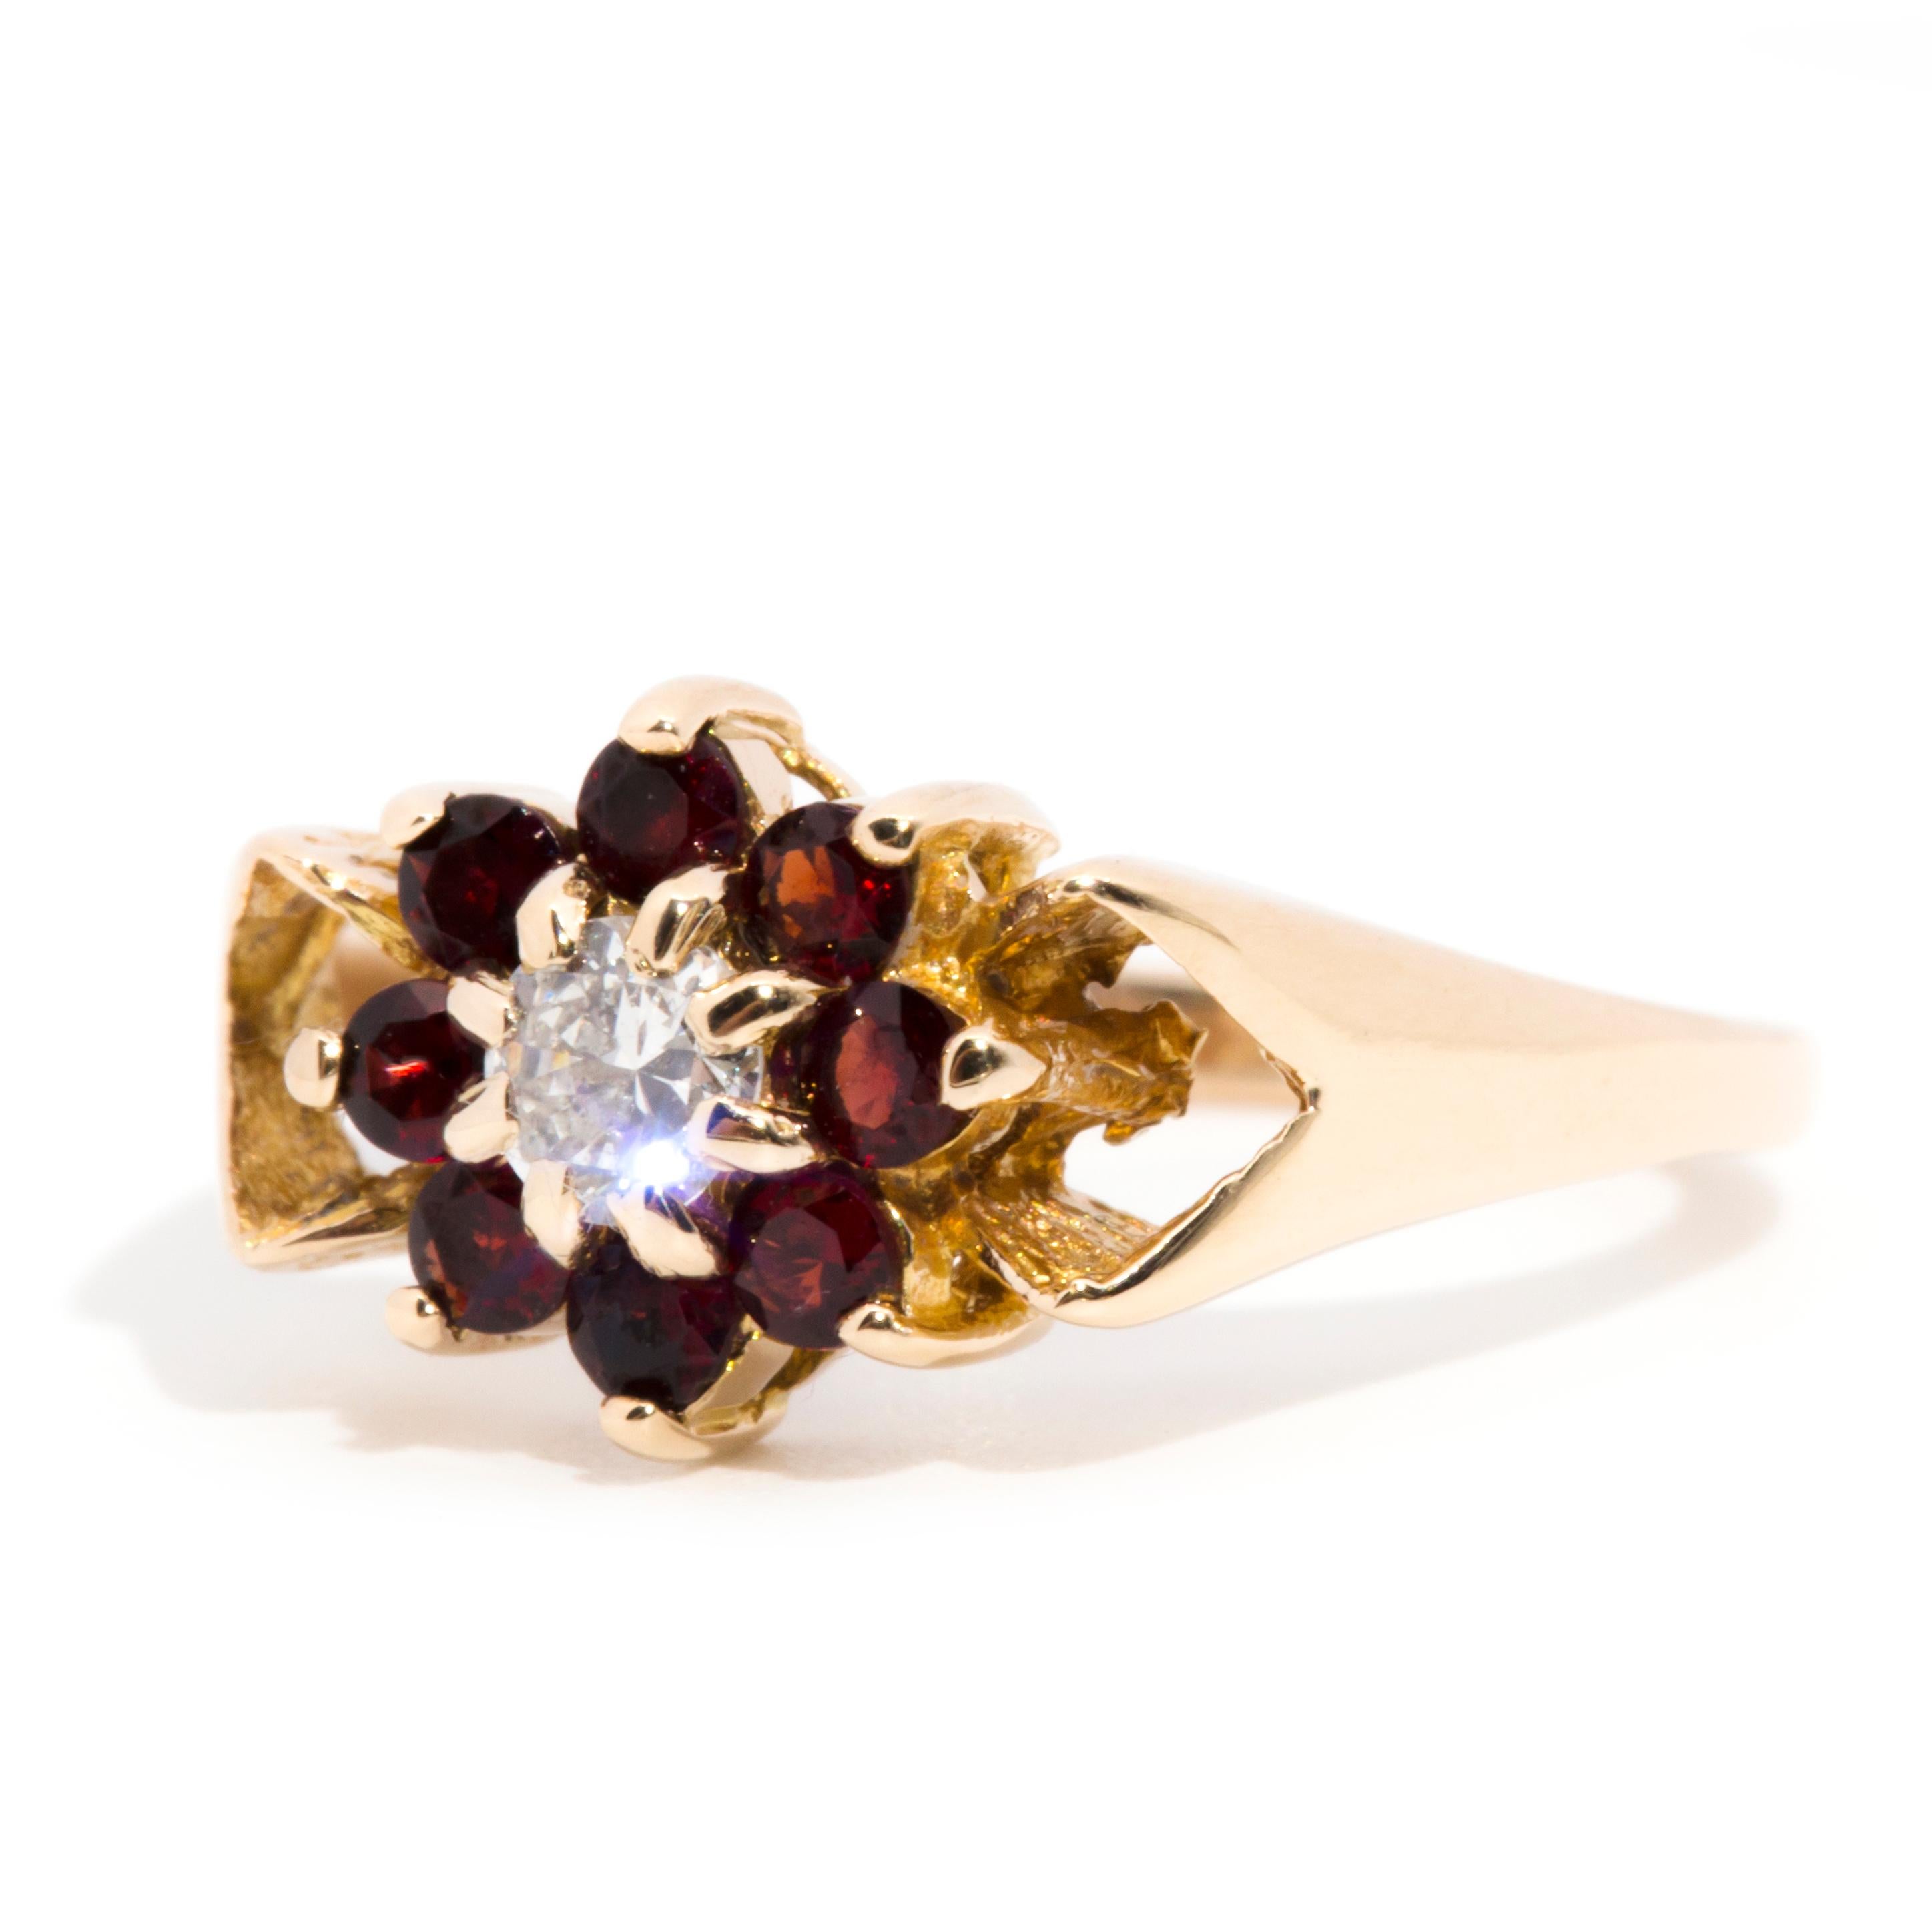 Crafted in 9 carat yellow gold, this darling vintage cluster ring, circa 1980s, is ever so charming with her shimmering flower-shaped cluster embellished with a glistening round brilliant cut diamond surrounded by a halo of gorgeous garnets. This